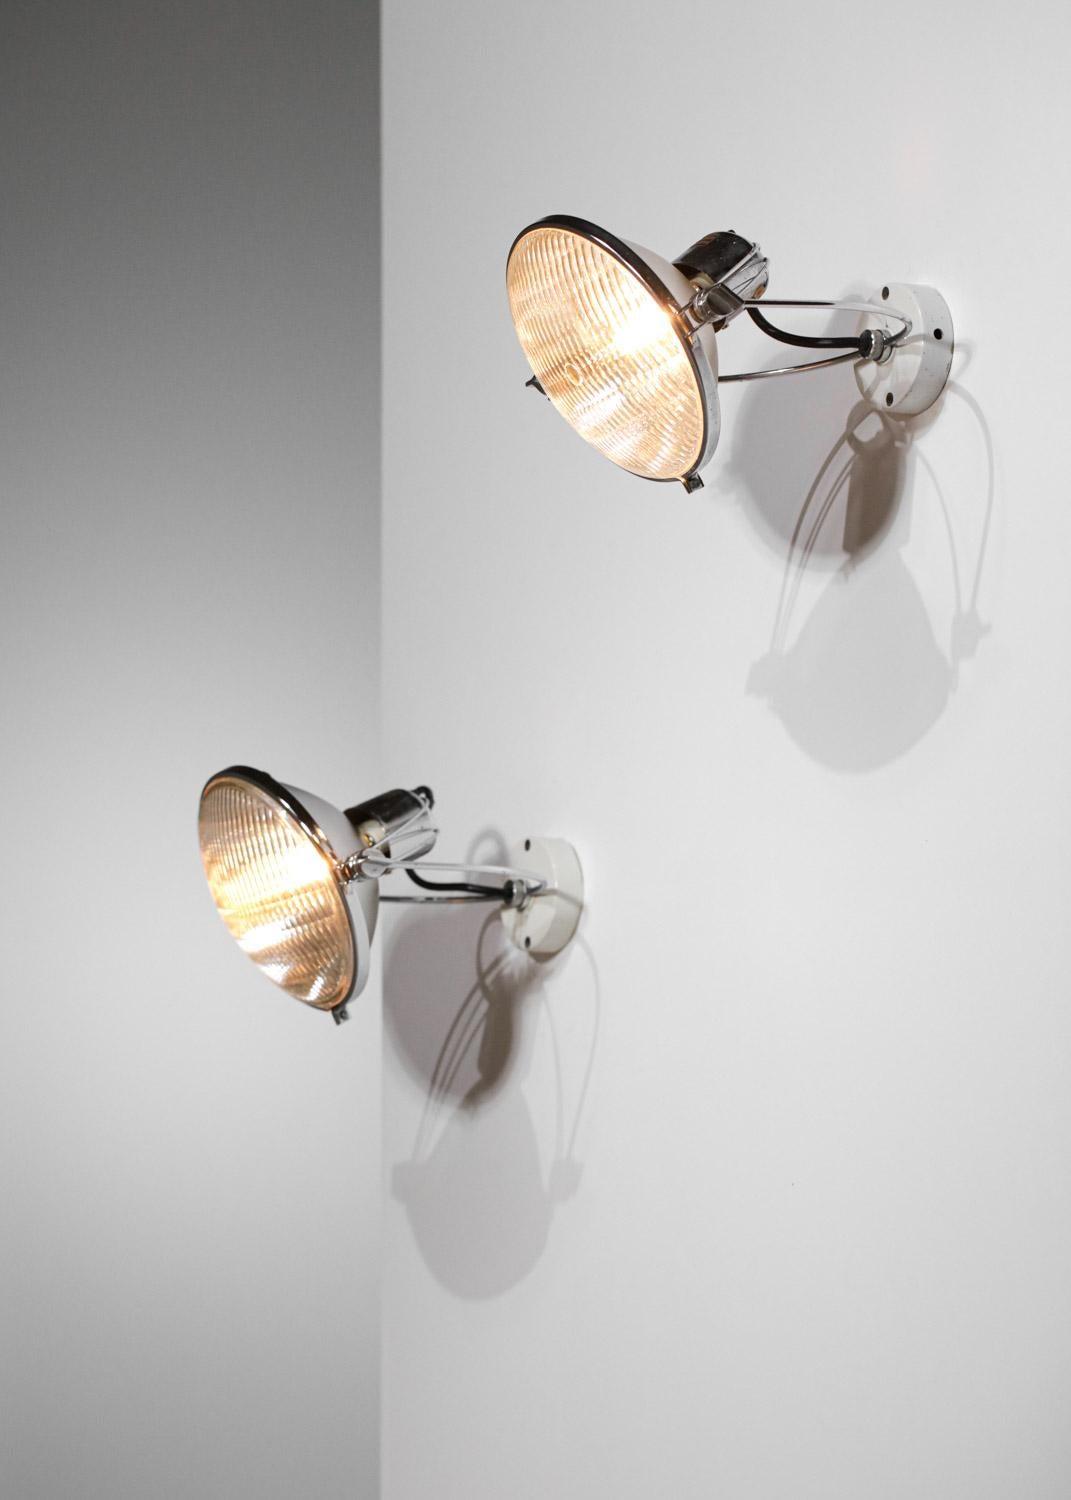 Mid-20th Century Pair of italian sconces 60's style Achille Castiglioni glass and chromed metal  For Sale